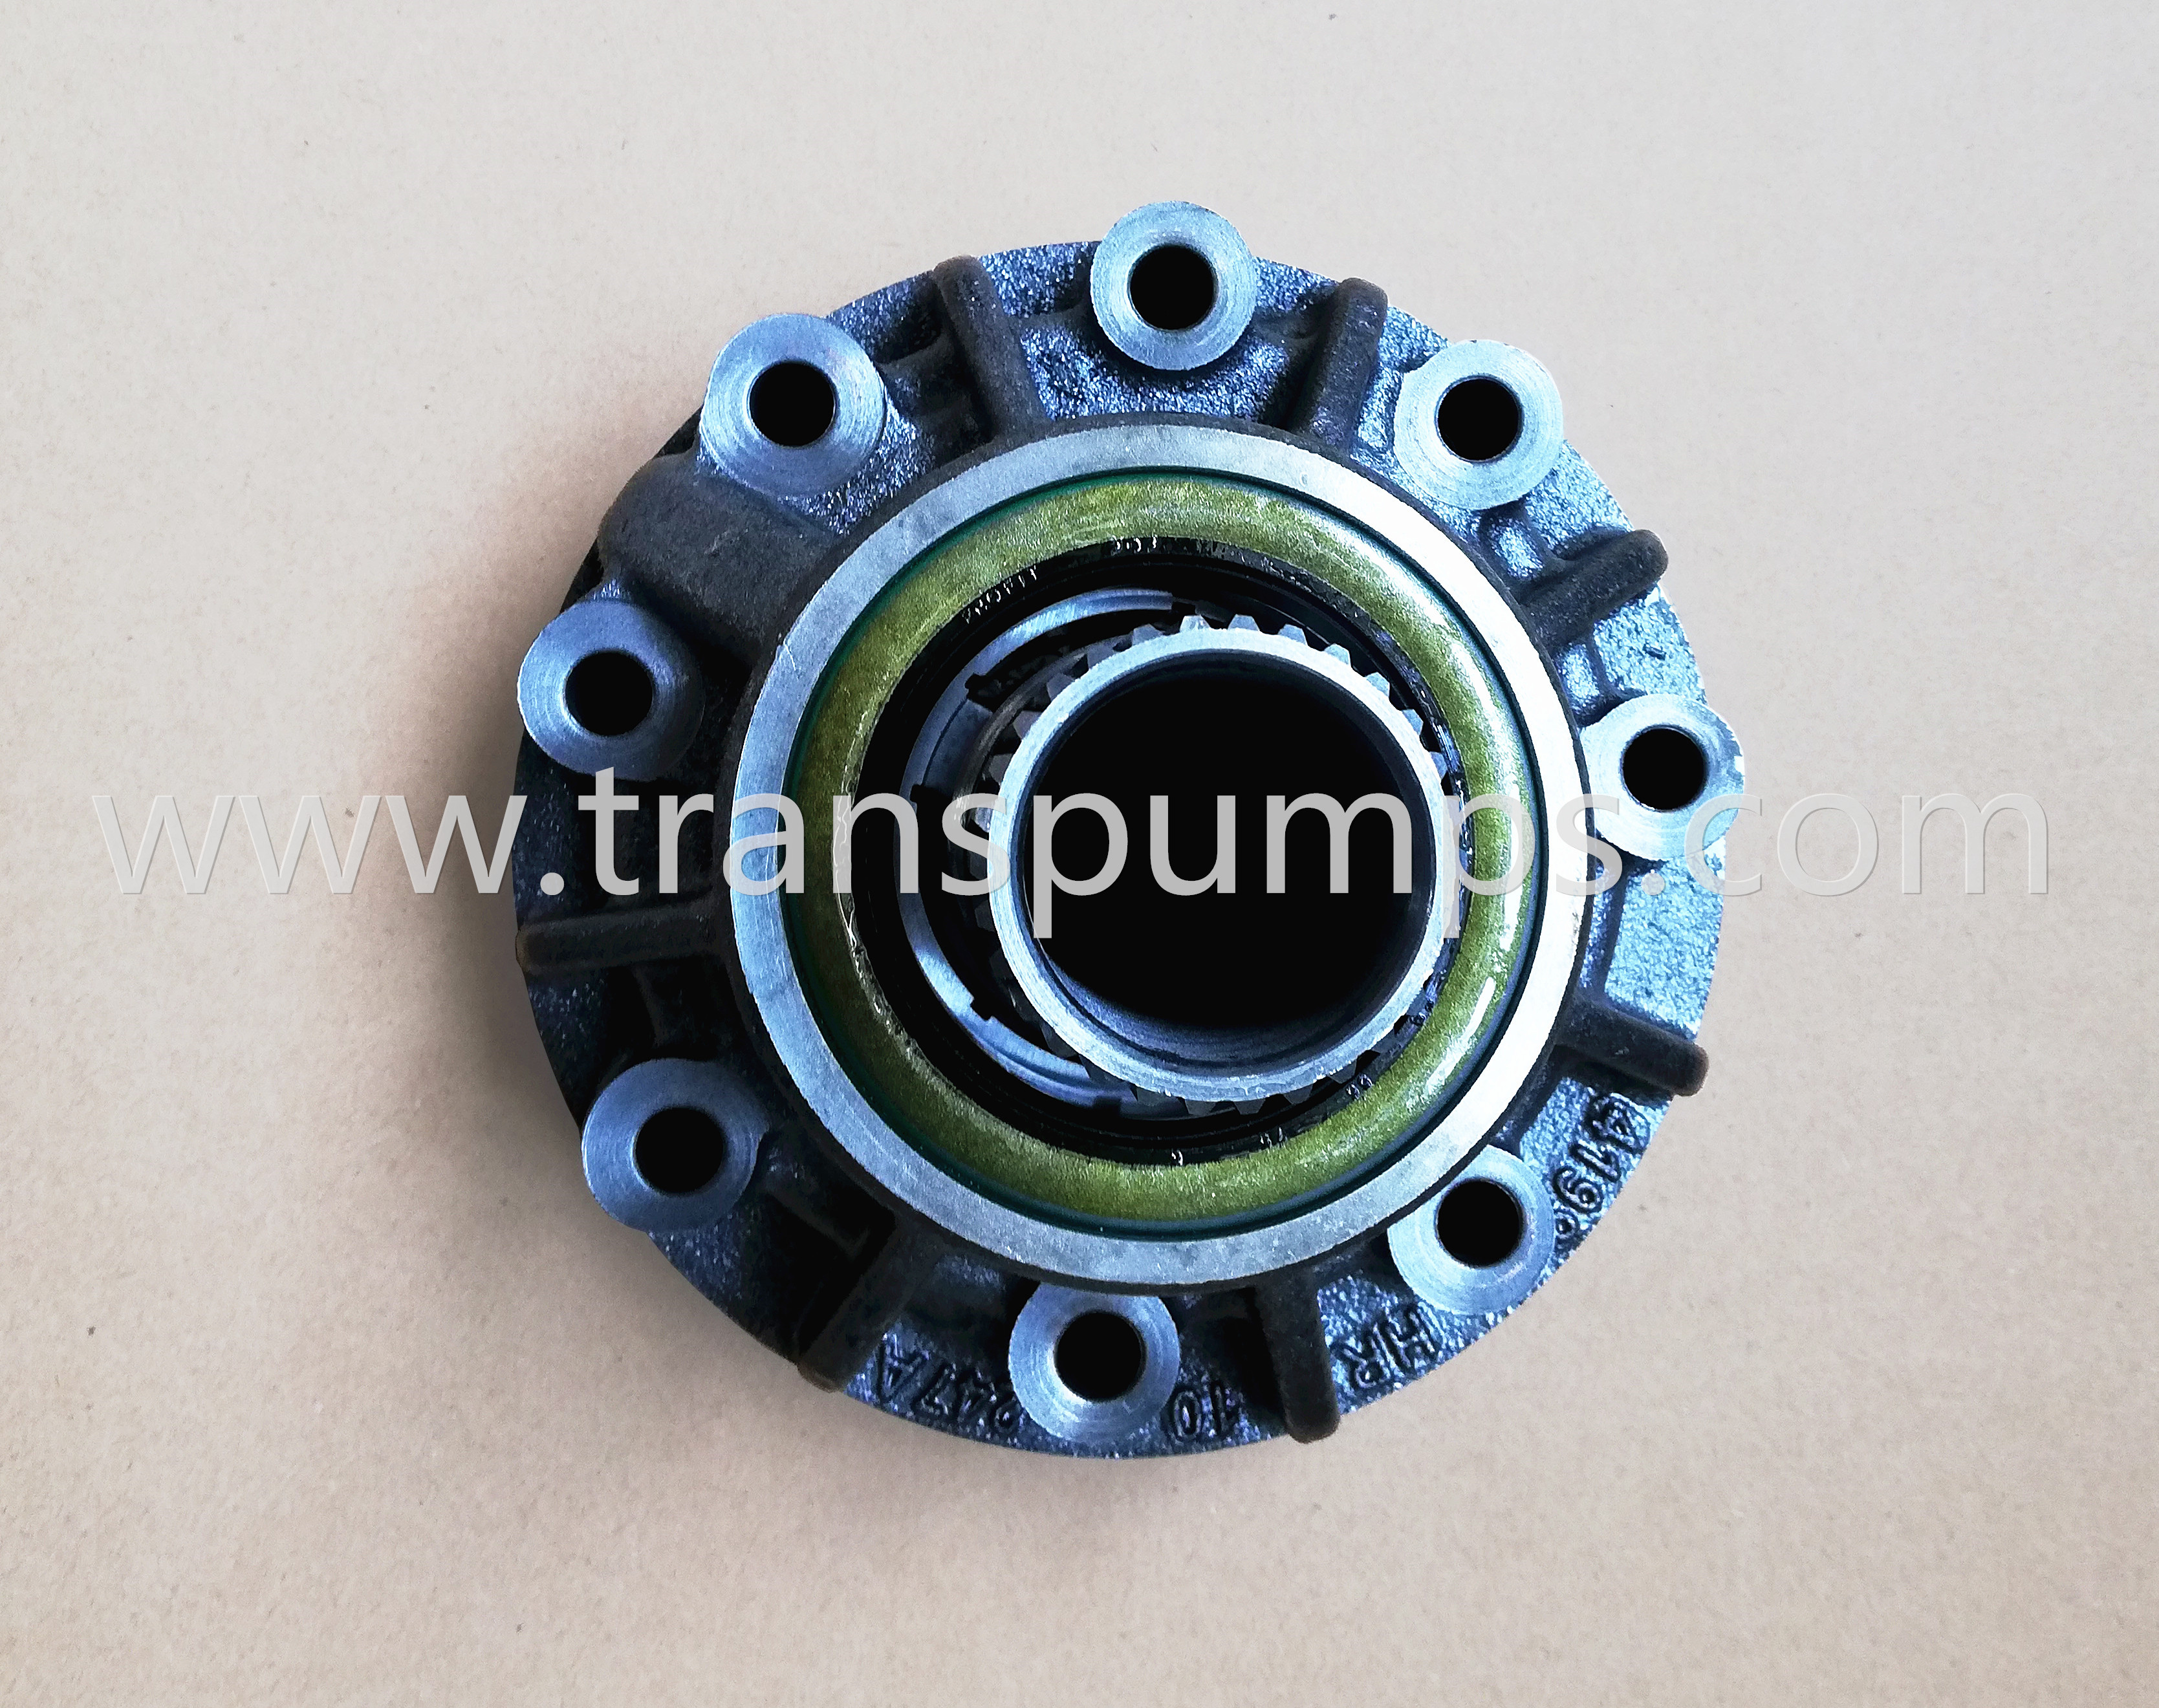 ZF pump manufacturer, ZF pump 050122220664, John deere backhoe charge pump, transmission oil pump assy, transmission pump replacement price, ZF Pump Assembly Transmission, ZF transmission pump assembly 0501220664, Насос, 0501.220.664 OR 0501220664 OR 0501-220-664 OR 0501 220 664 ZF, ZF 0501220664 pumpe, New original ZF 0501220664 pump, ZF bomba, ZF pompa, ZF hacoc, ZF pumpe, ZF pompe